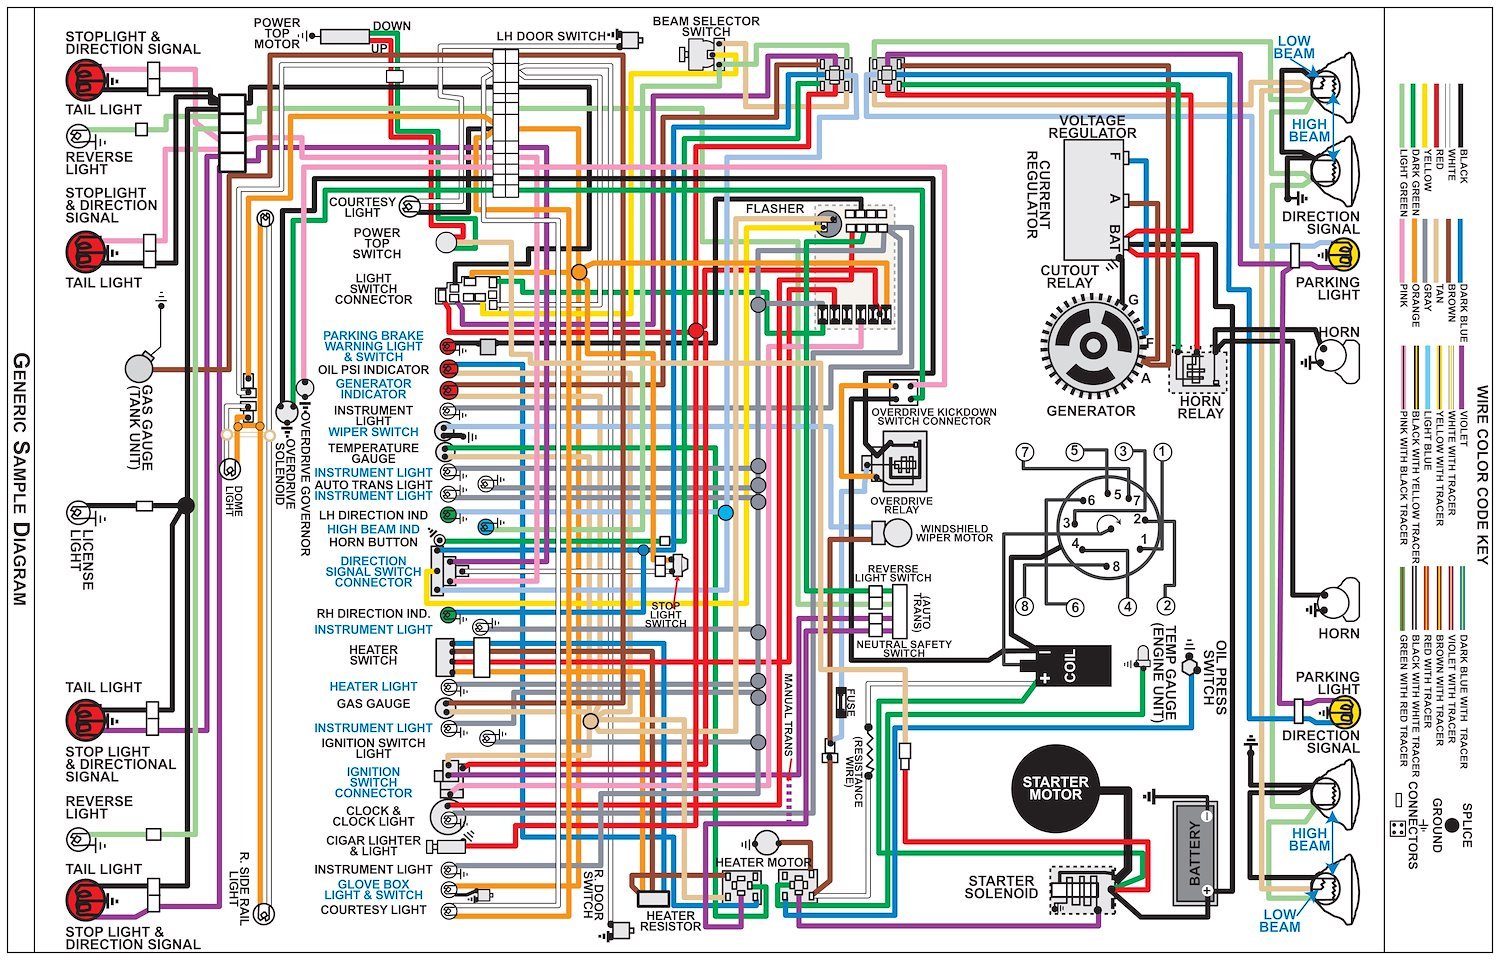 Wiring Diagram for 1971 Ford F-Series Truck, 11 in x 17 in., Laminated